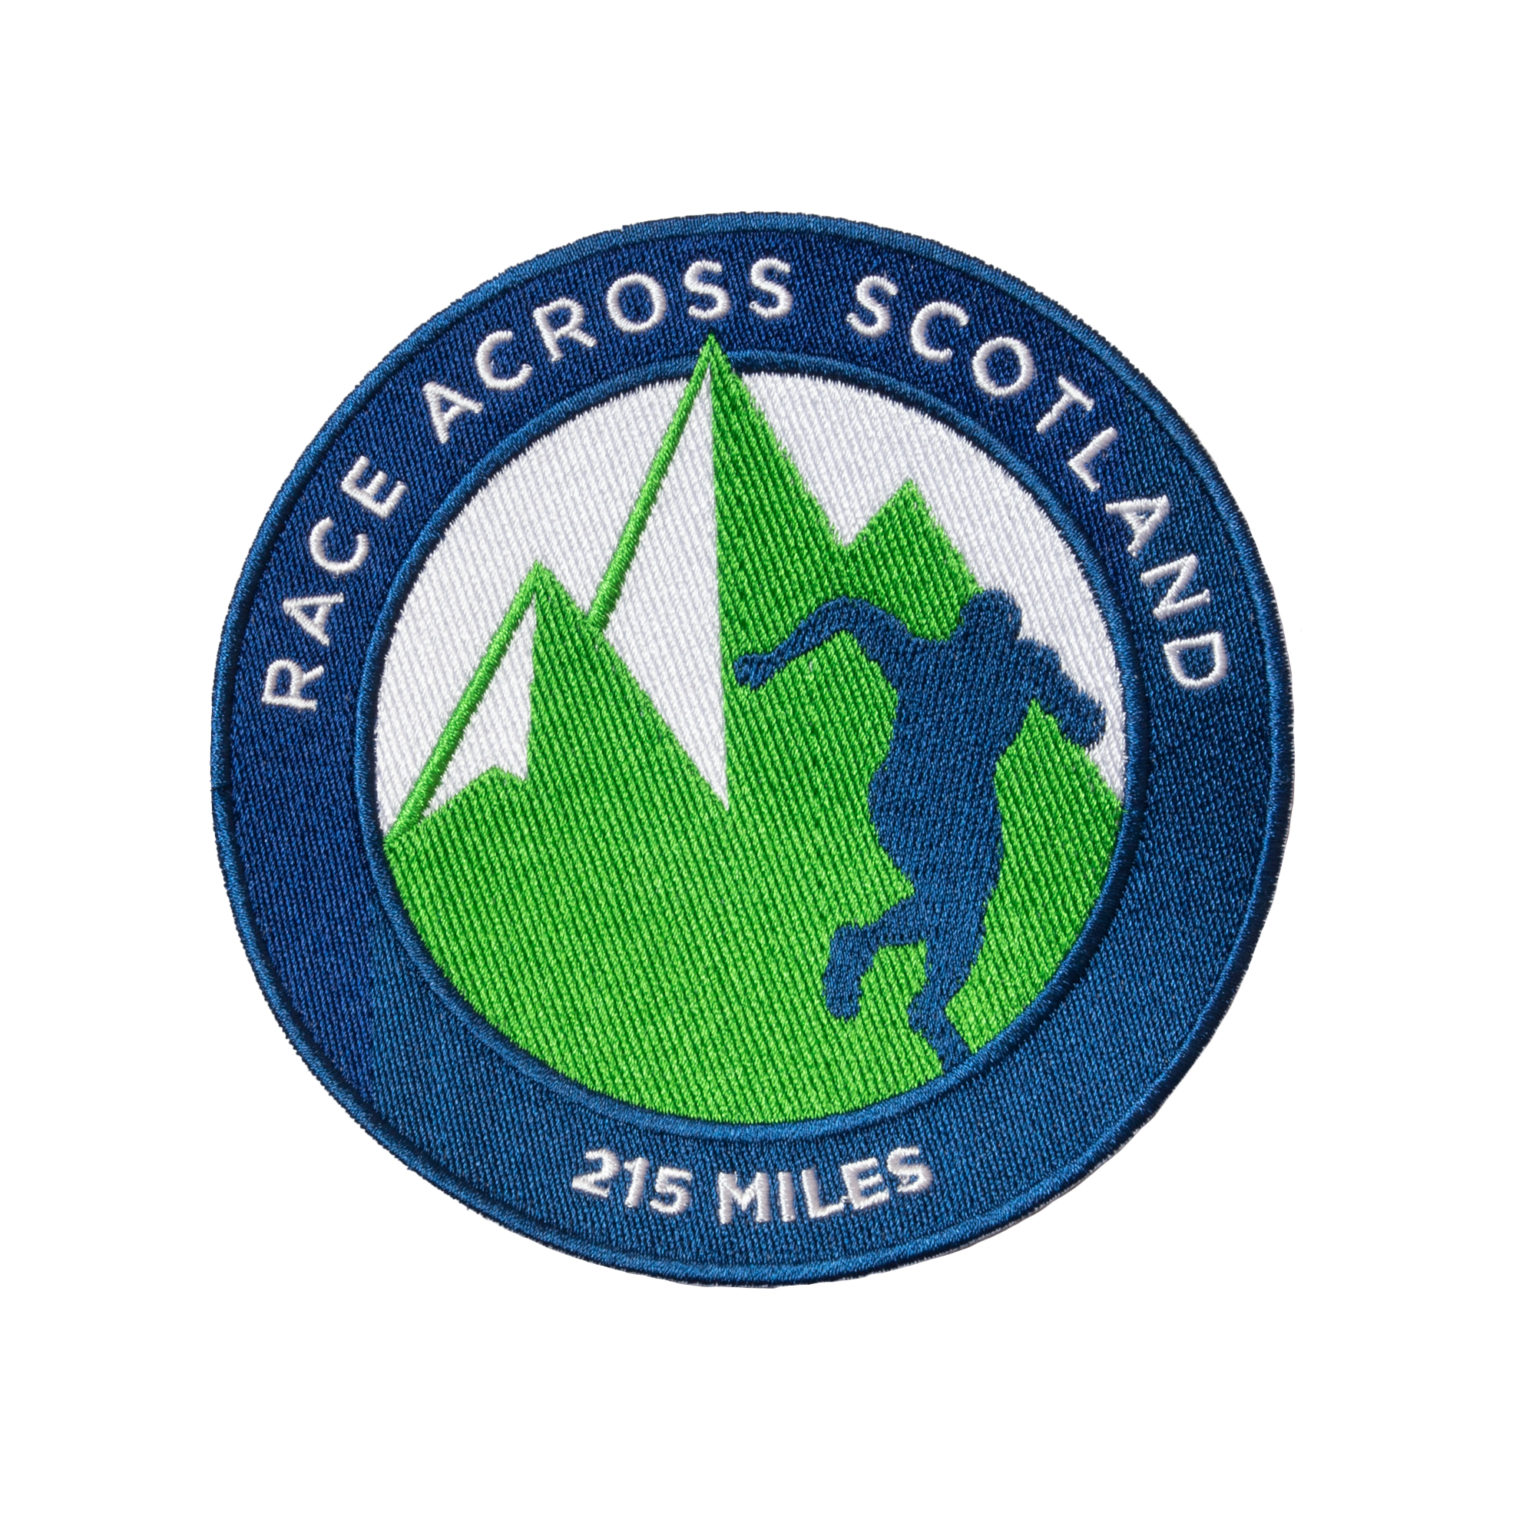 Race Across Scotland Embroidered Patch GBultras